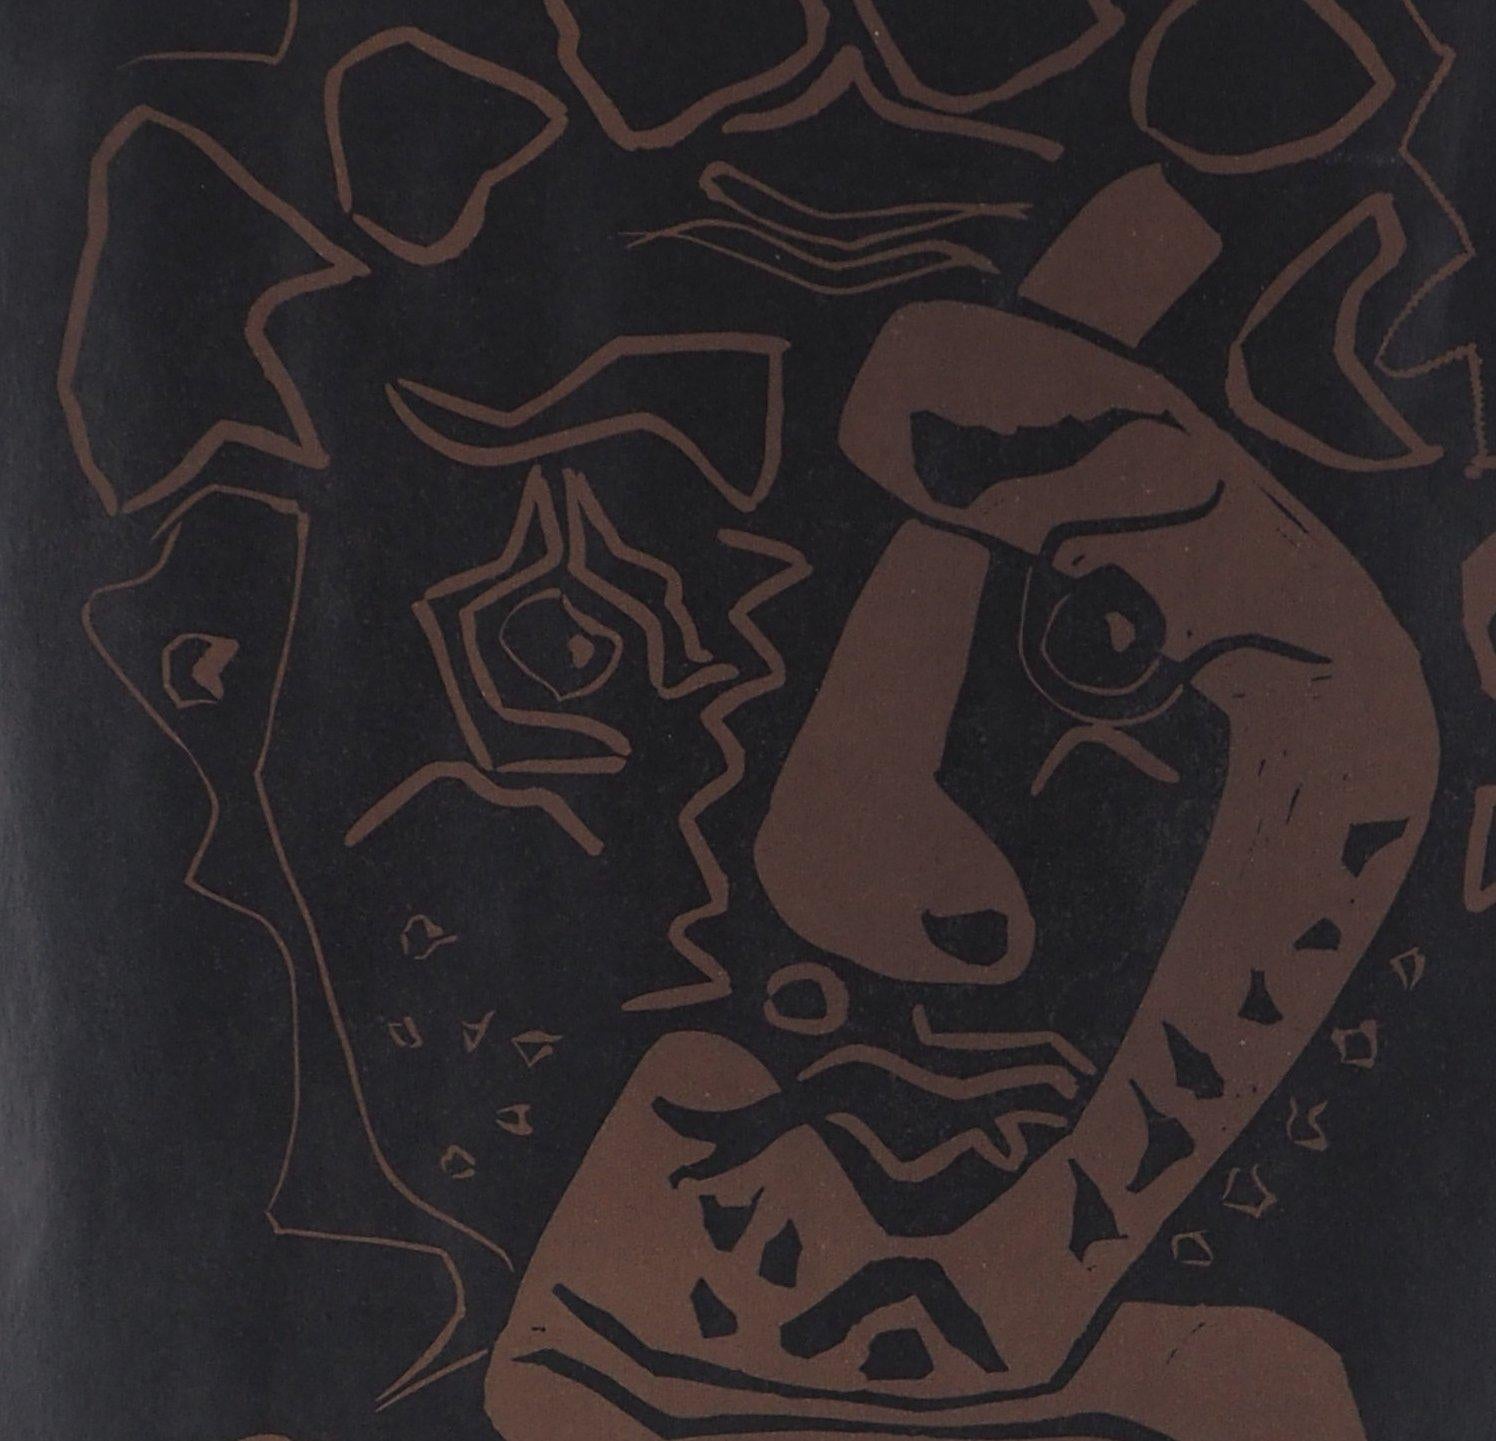 Histrion Head (Picasso and Theater) - Linocut, 1965 (ref. Czwiklitzer #22) - Beige Portrait Print by (after) Pablo Picasso